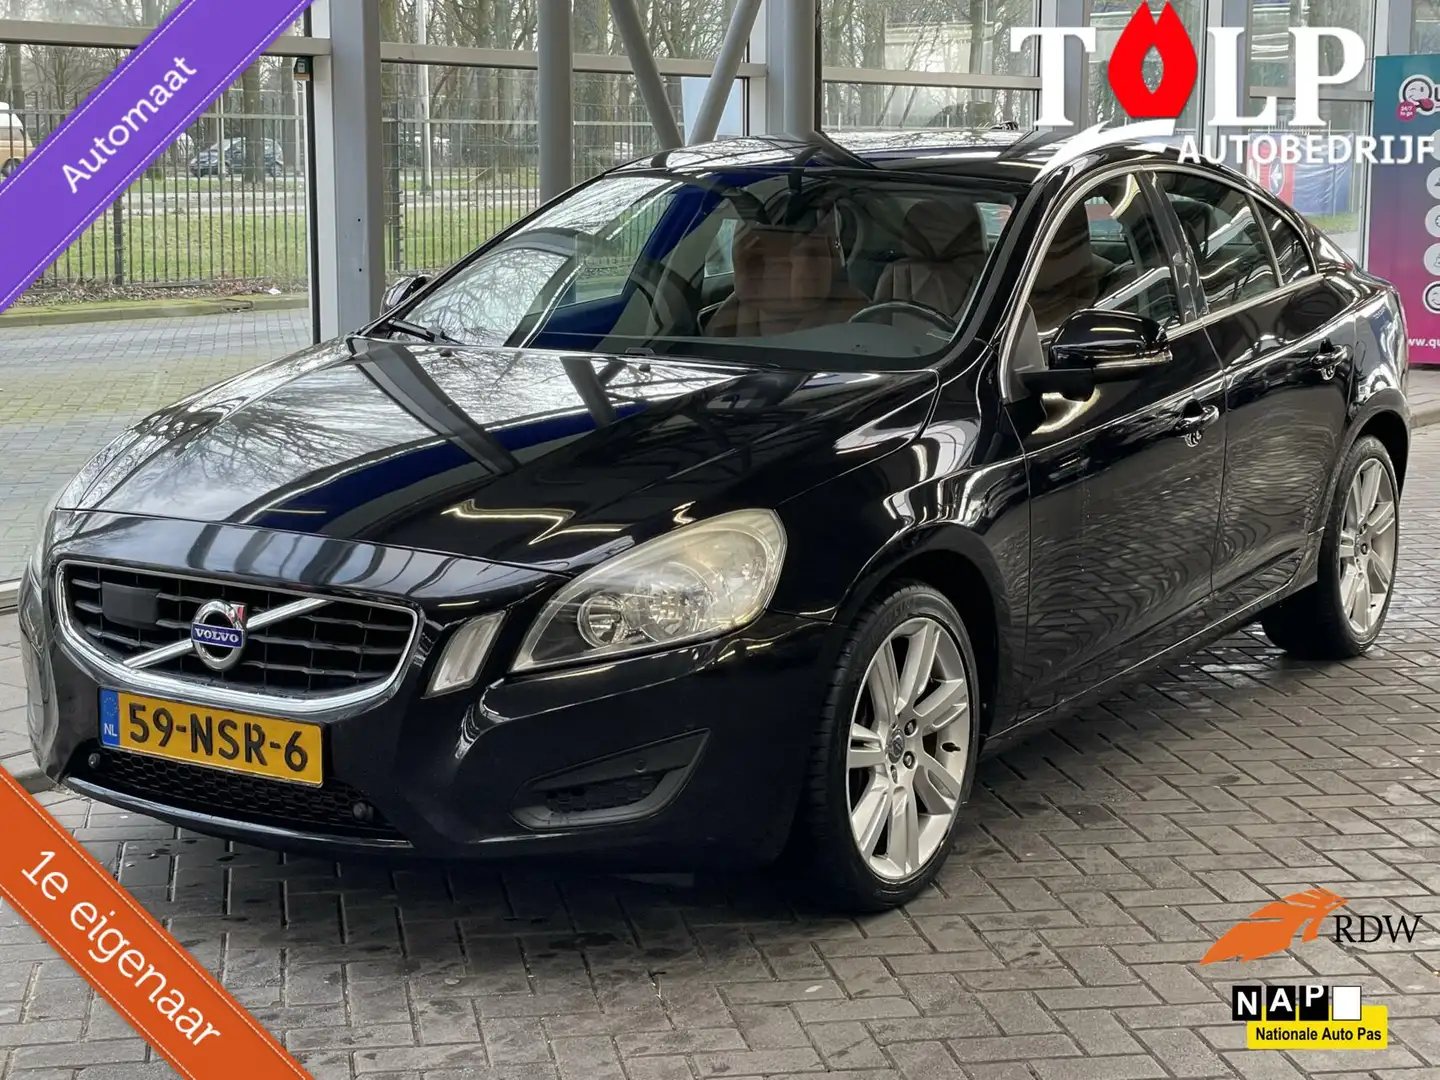 Volvo S60 2.0T Momentum Aut 2010 org 64793 km Nap volle auto Siyah - 1